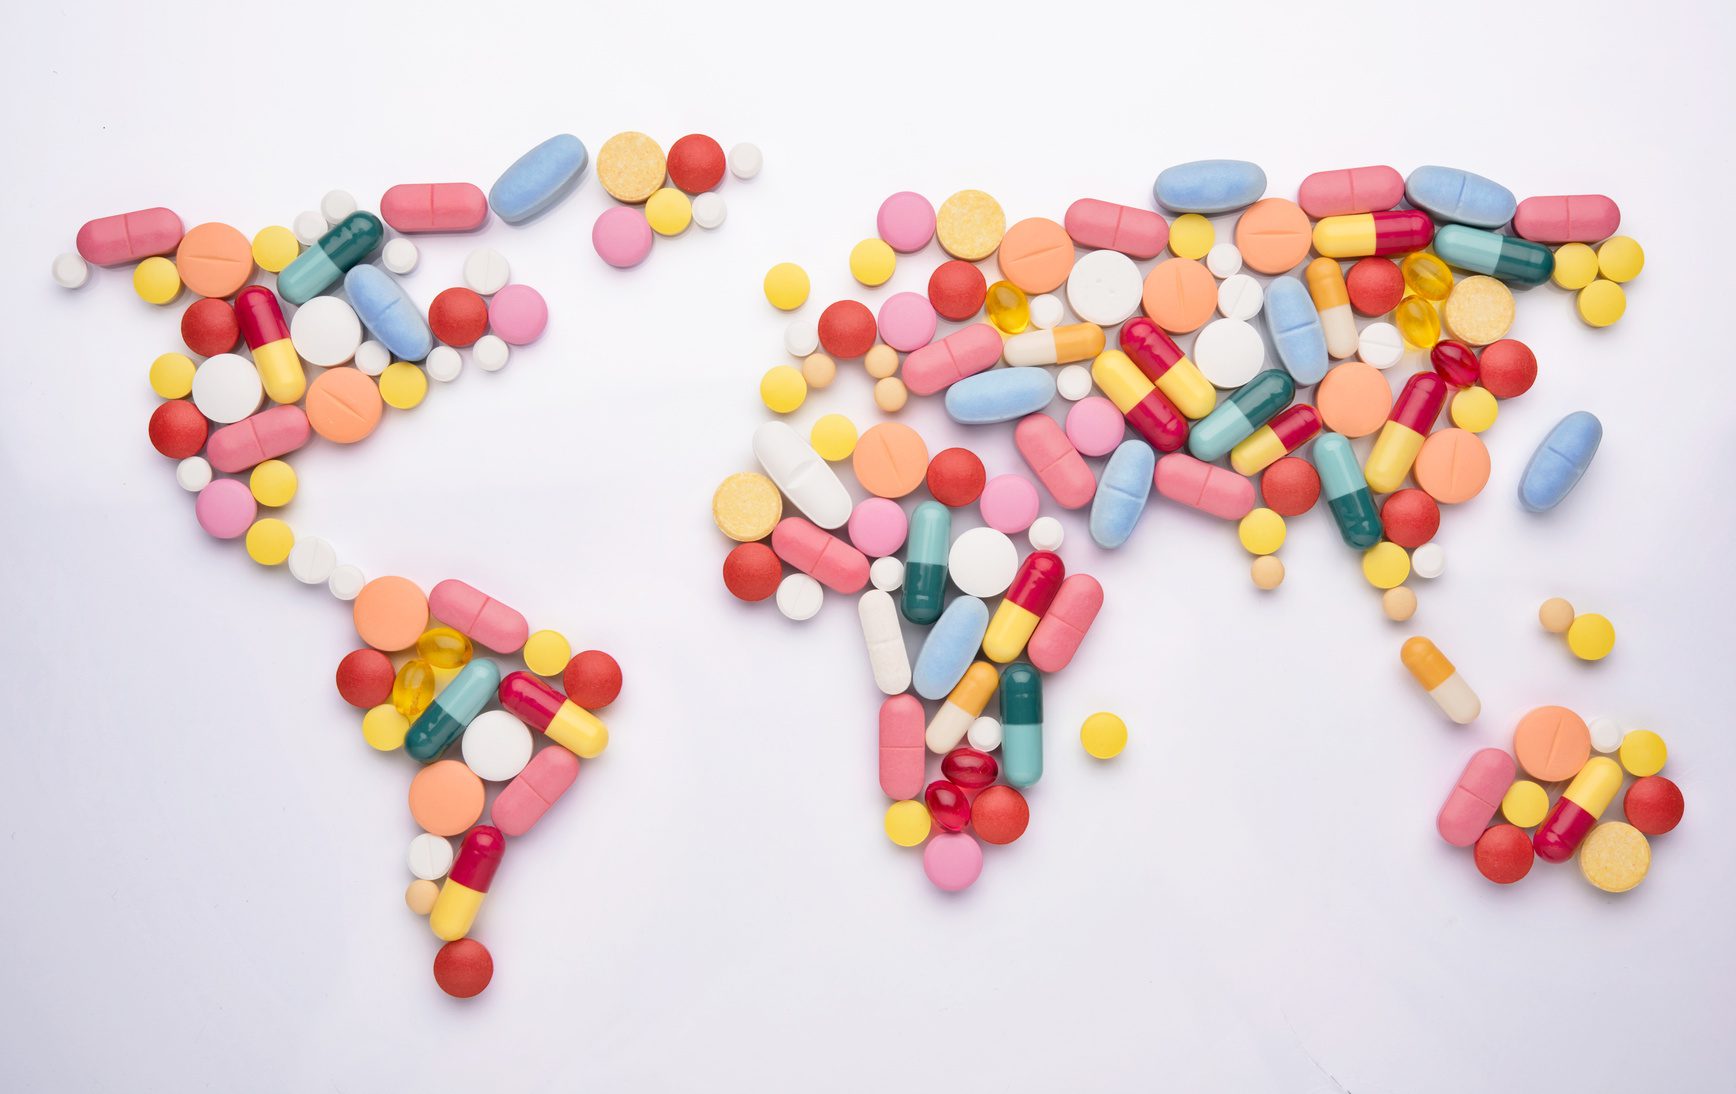 Global Pharmaceutical Market Scenario – Challenges, Action Plan and Potential Outcome